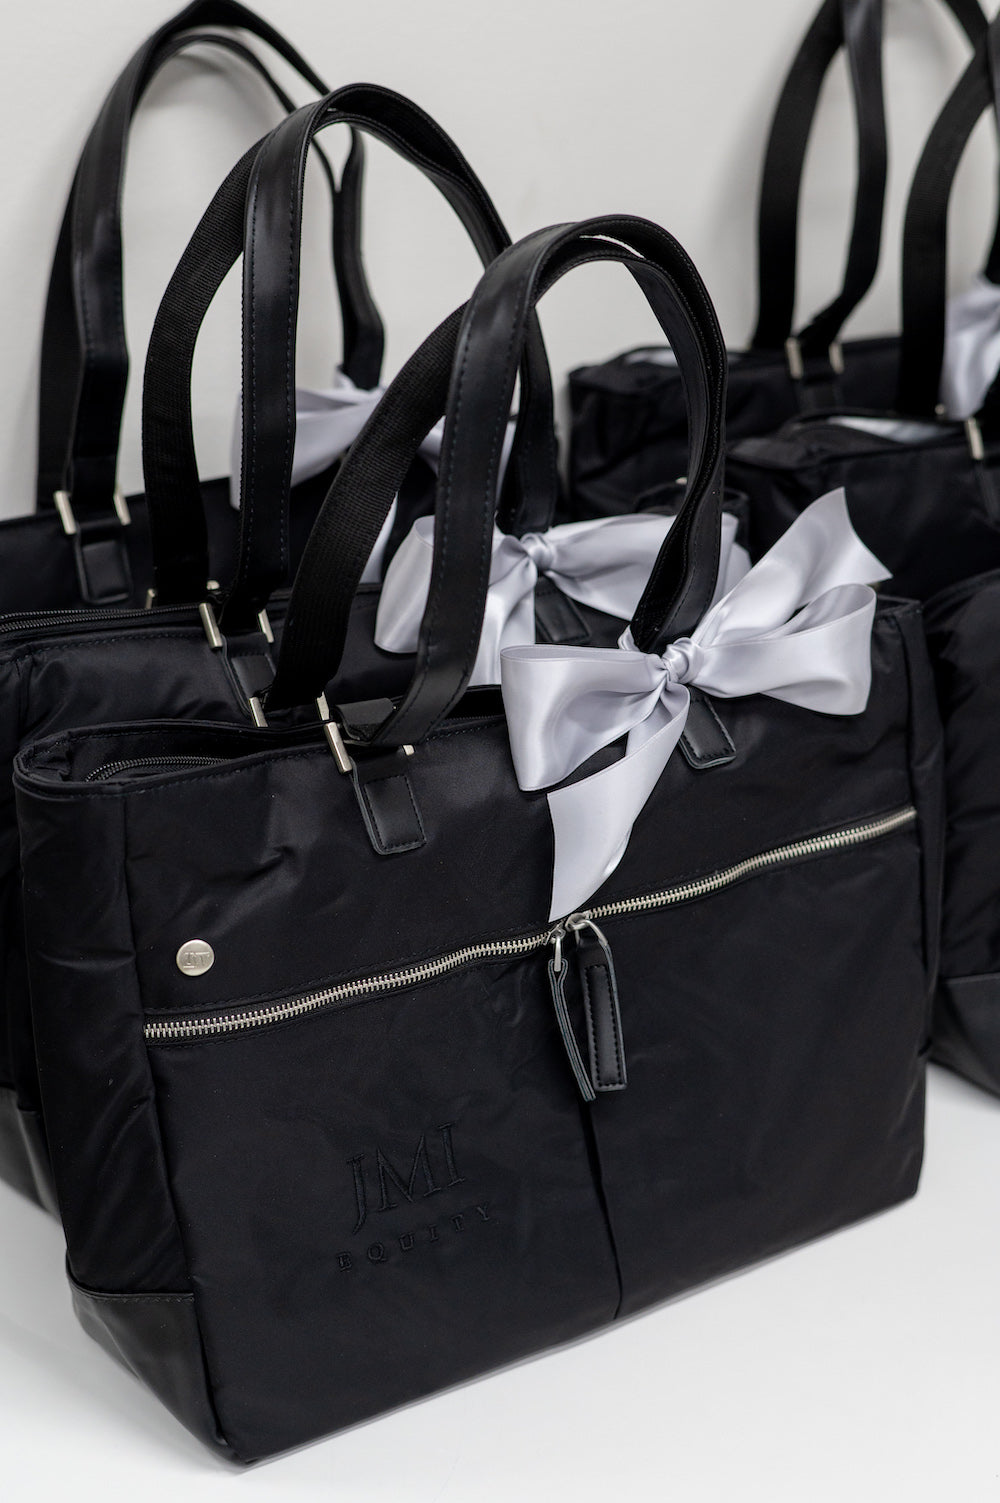 Custom Corporate Gifts, Tech Tote Bags For Women's Conference, Luxury Branded, curated by Marigold & Grey